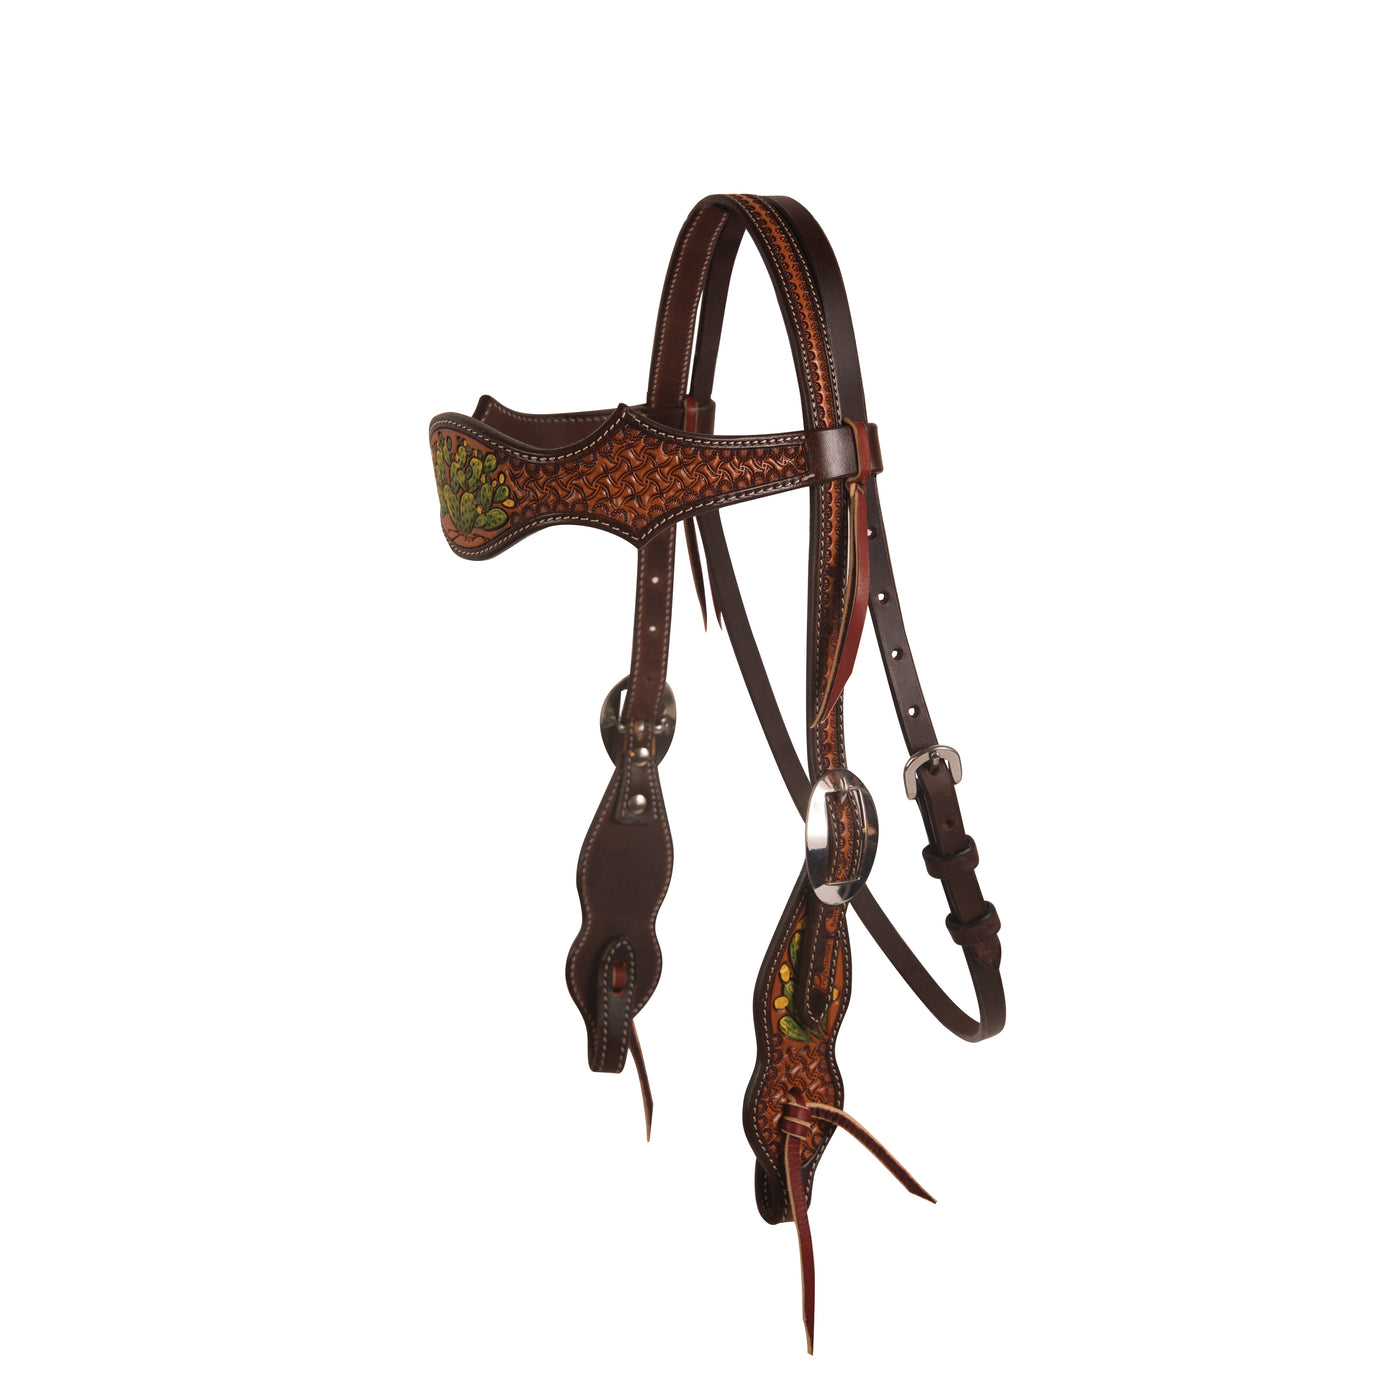 Professional's Choice Cactus Browband Headstall